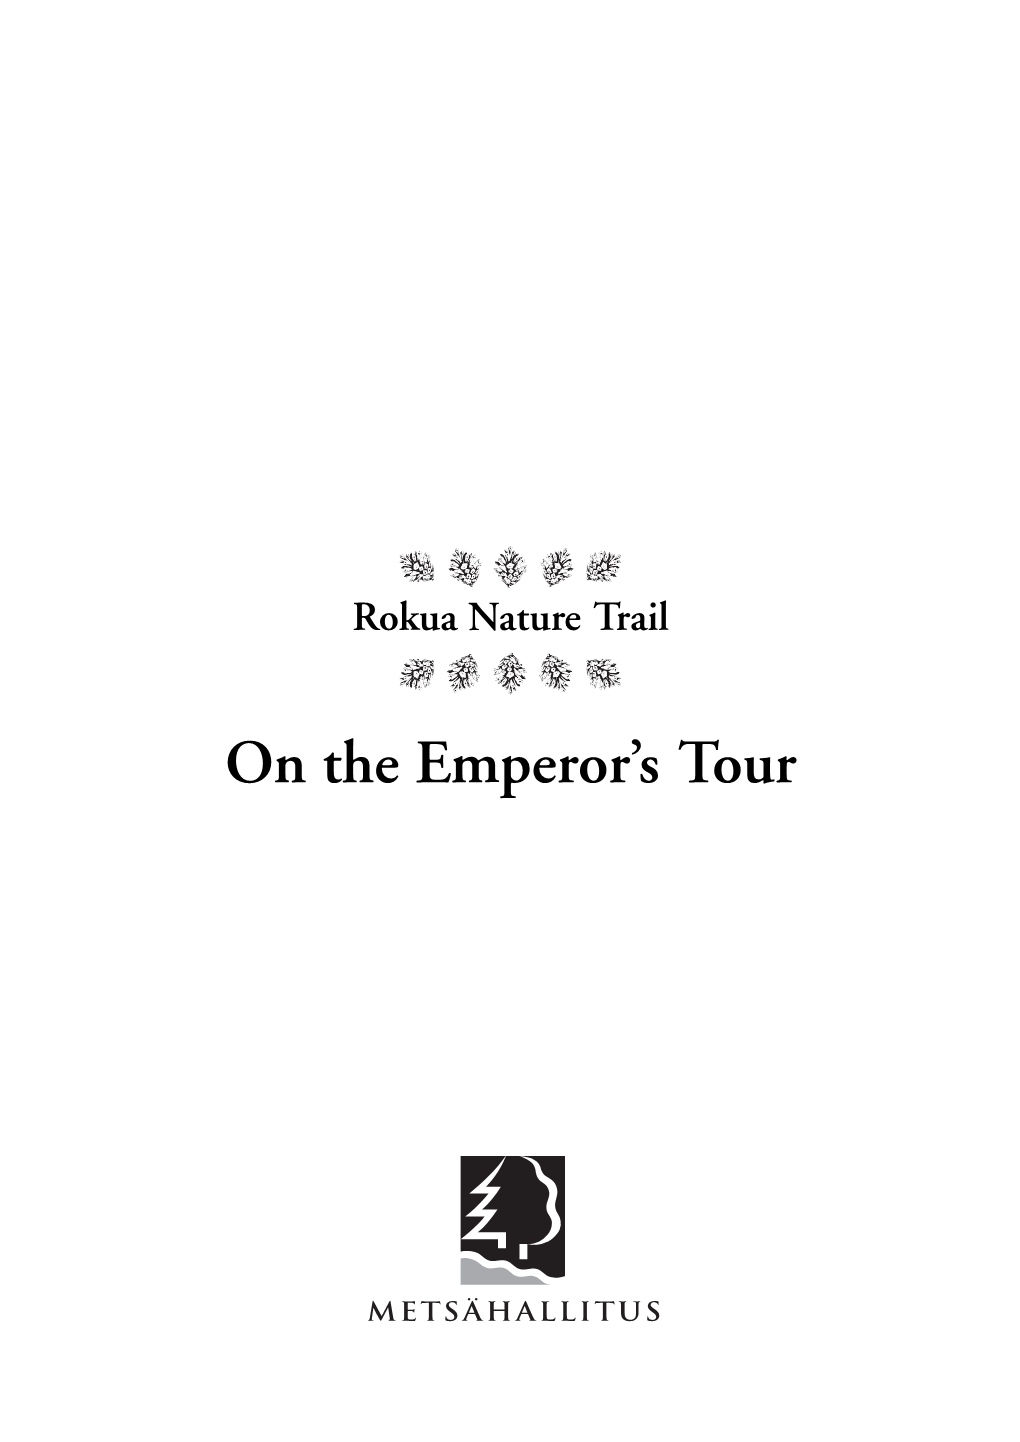 On the Emperor's Tour